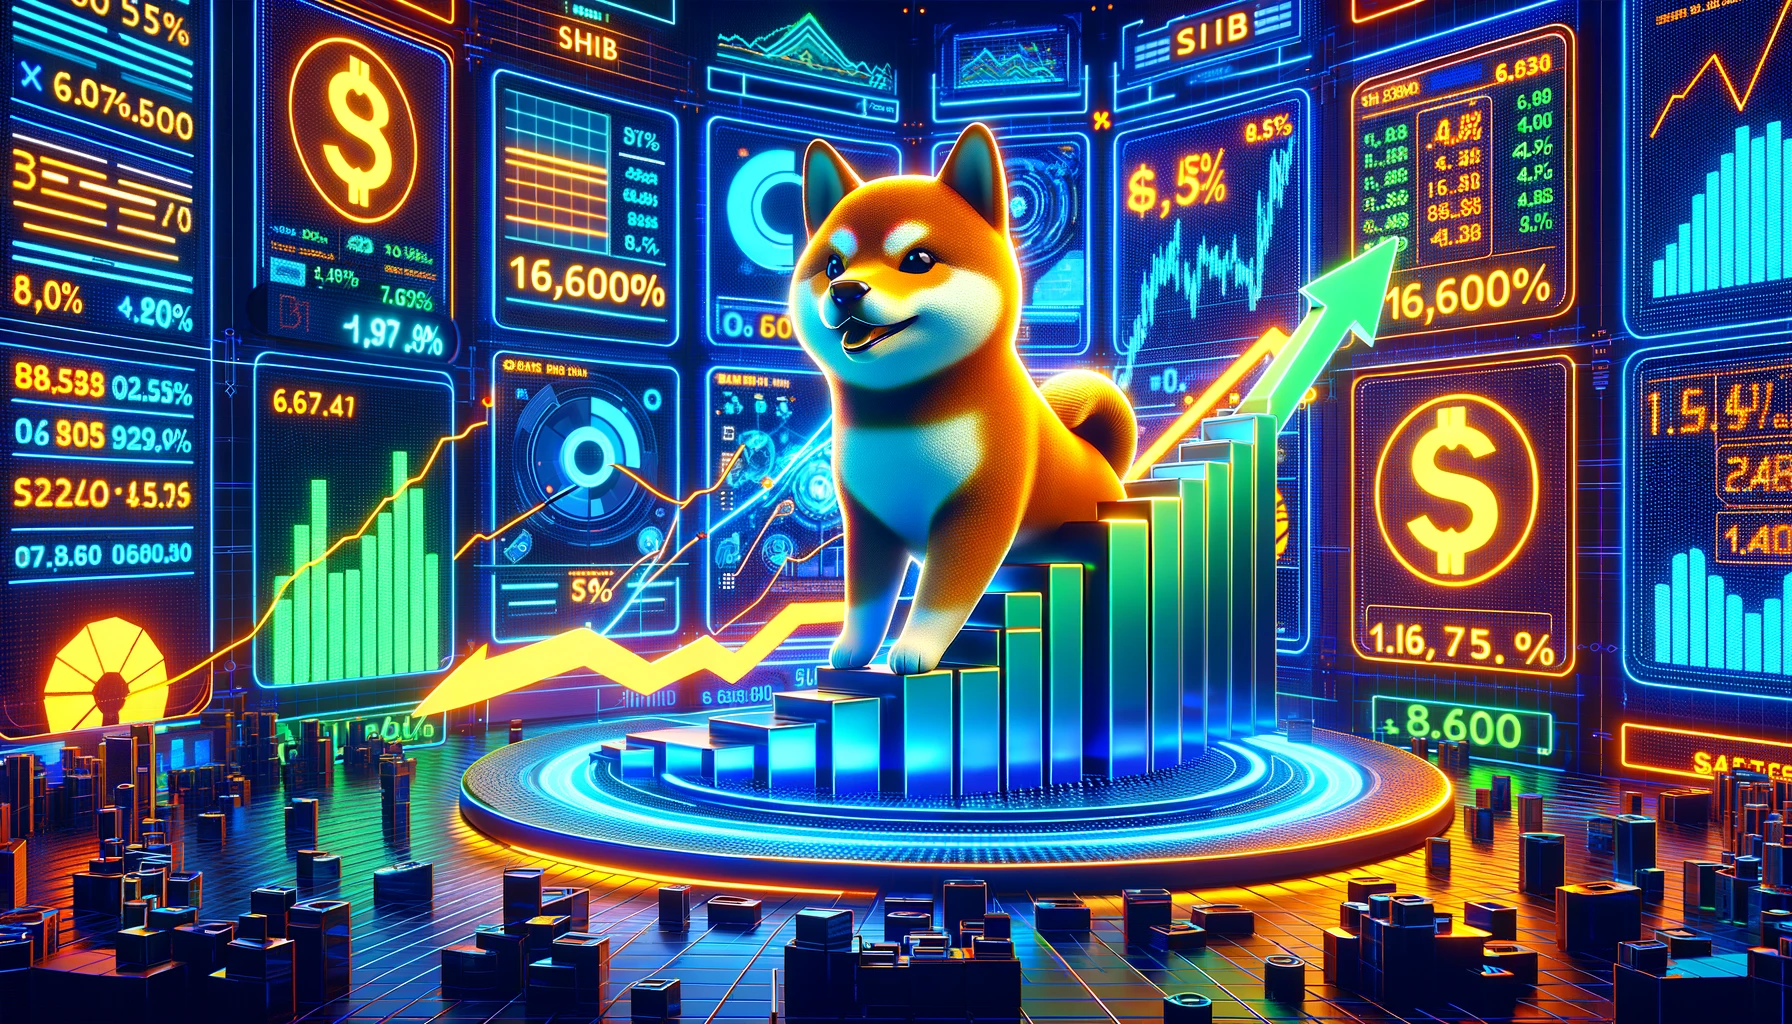 Shiba Inu’s 16,600% Burn Rate Increase: Can It Propel SHIB Price to a New All-Time High?